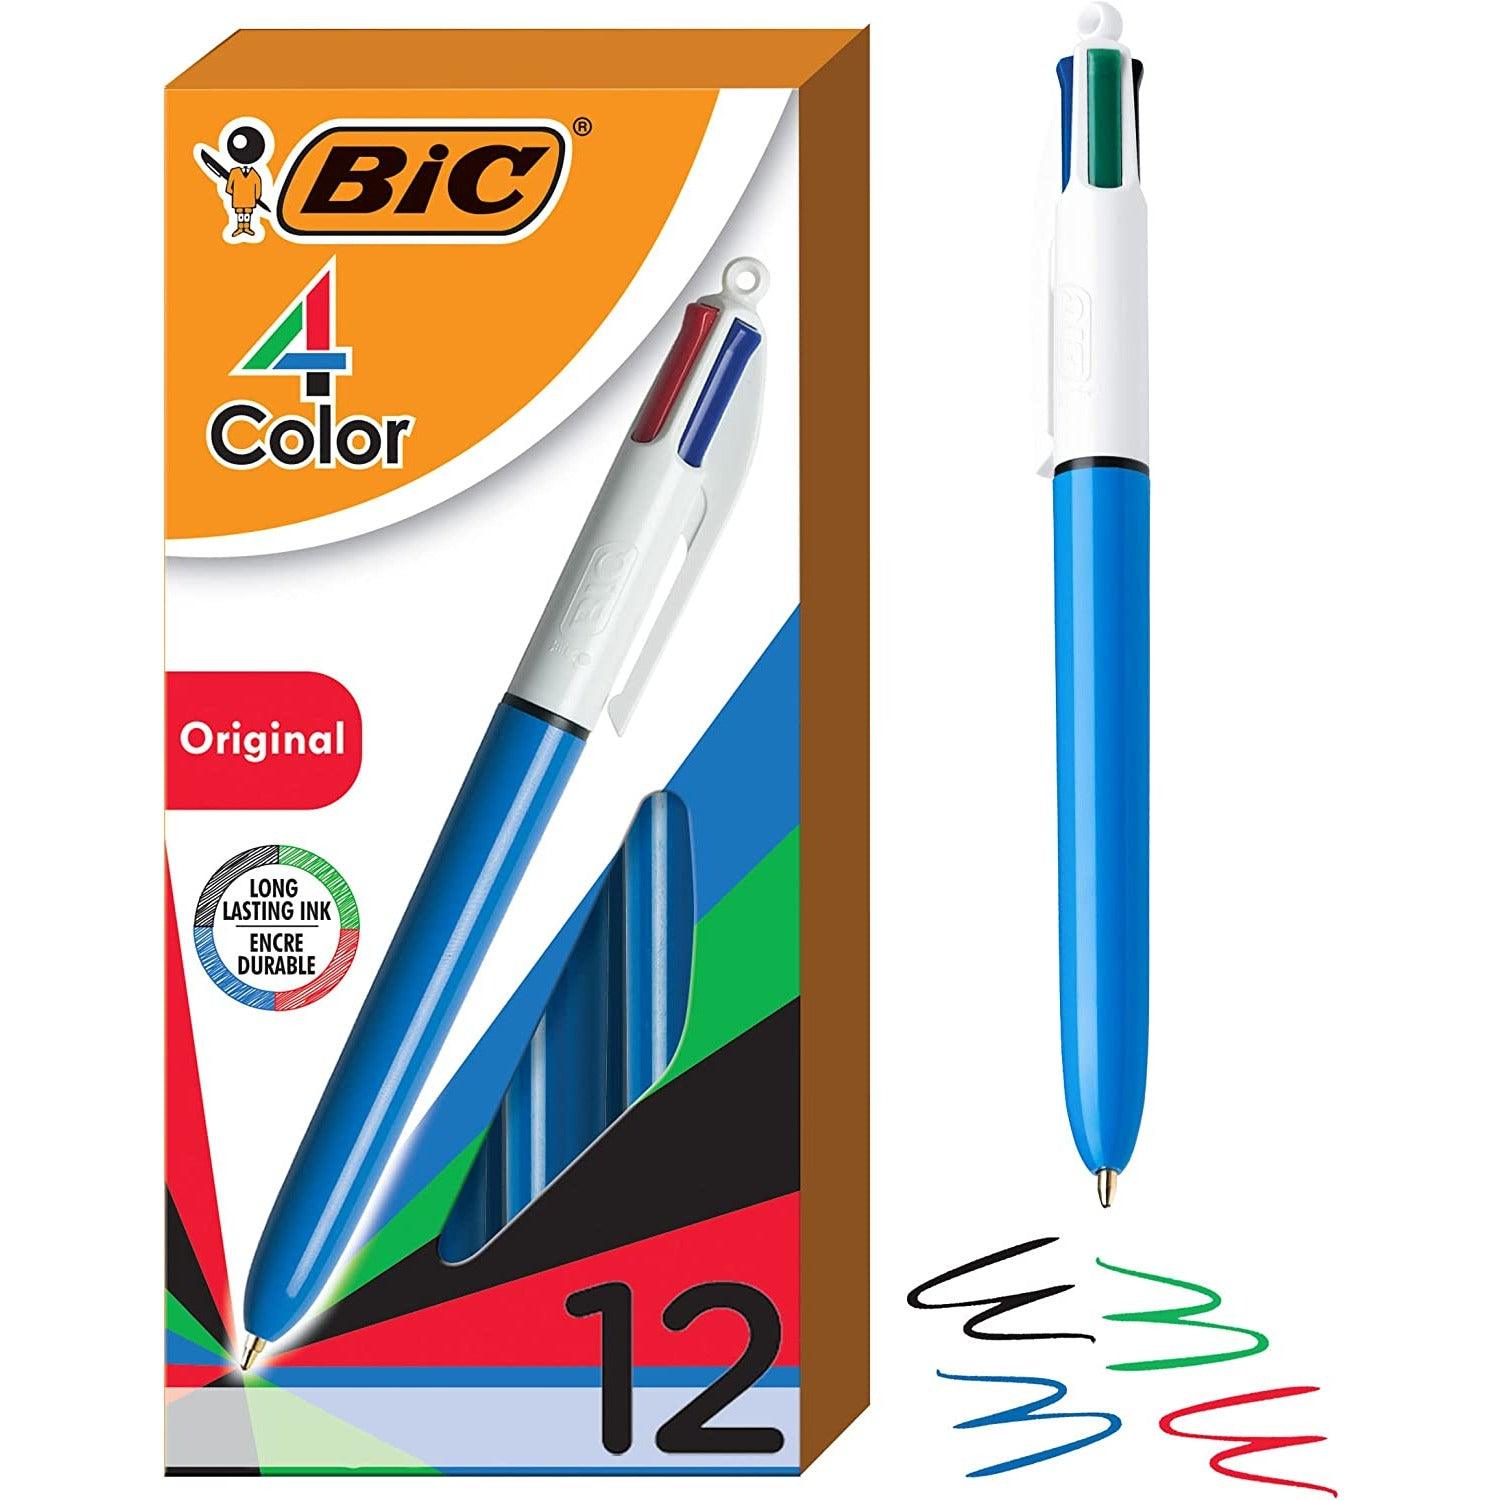 BIC 4-Color Original Retractable Ball Pens, Medium Point (1.0mm), 12-Count Pack - BumbleToys - 14 Years & Up, 18+, 5-7 Years, 6+ Years, 8-13 Years, Drawing & Painting, OXE, Pencil, Pre-Order, School Supplies, Stationery & Stickers